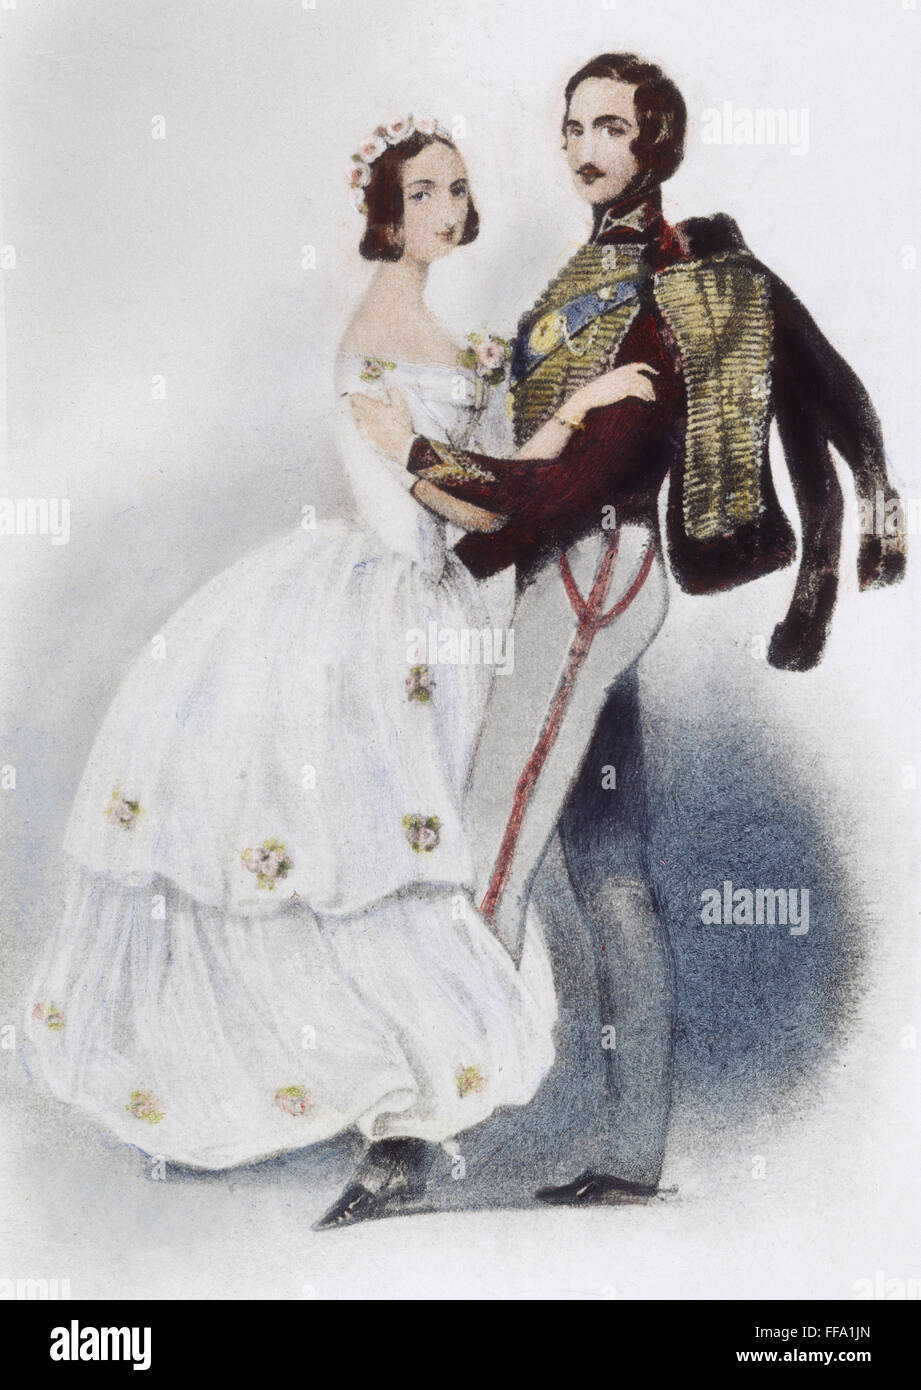 VICTORIA & ALBERT WALTZING. /nQueen Victoria and Prince Albert of England waltzing. English lithograph, c1845. Stock Photo